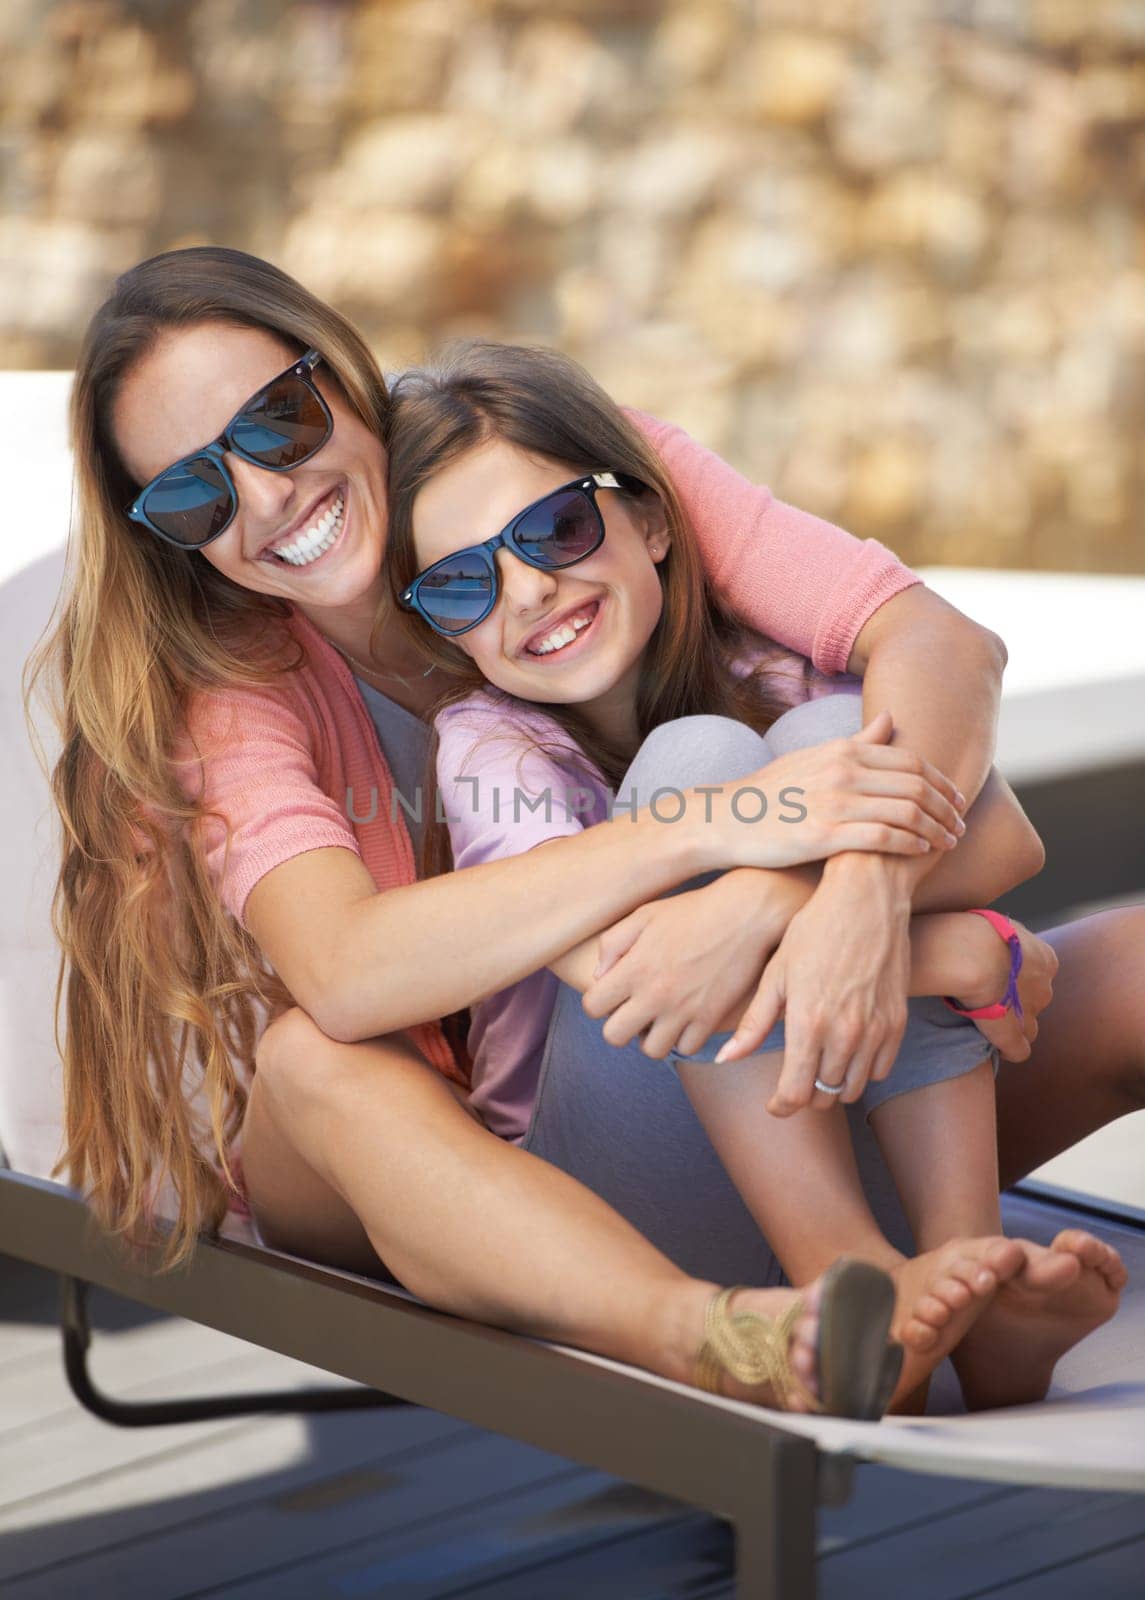 Portrait, smile and mother on vacation with daughter outdoor in sunglasses for summer, travel or holiday. Family, love and mom hugging girl child on poolside deck chair for bonding, trip or getaway.